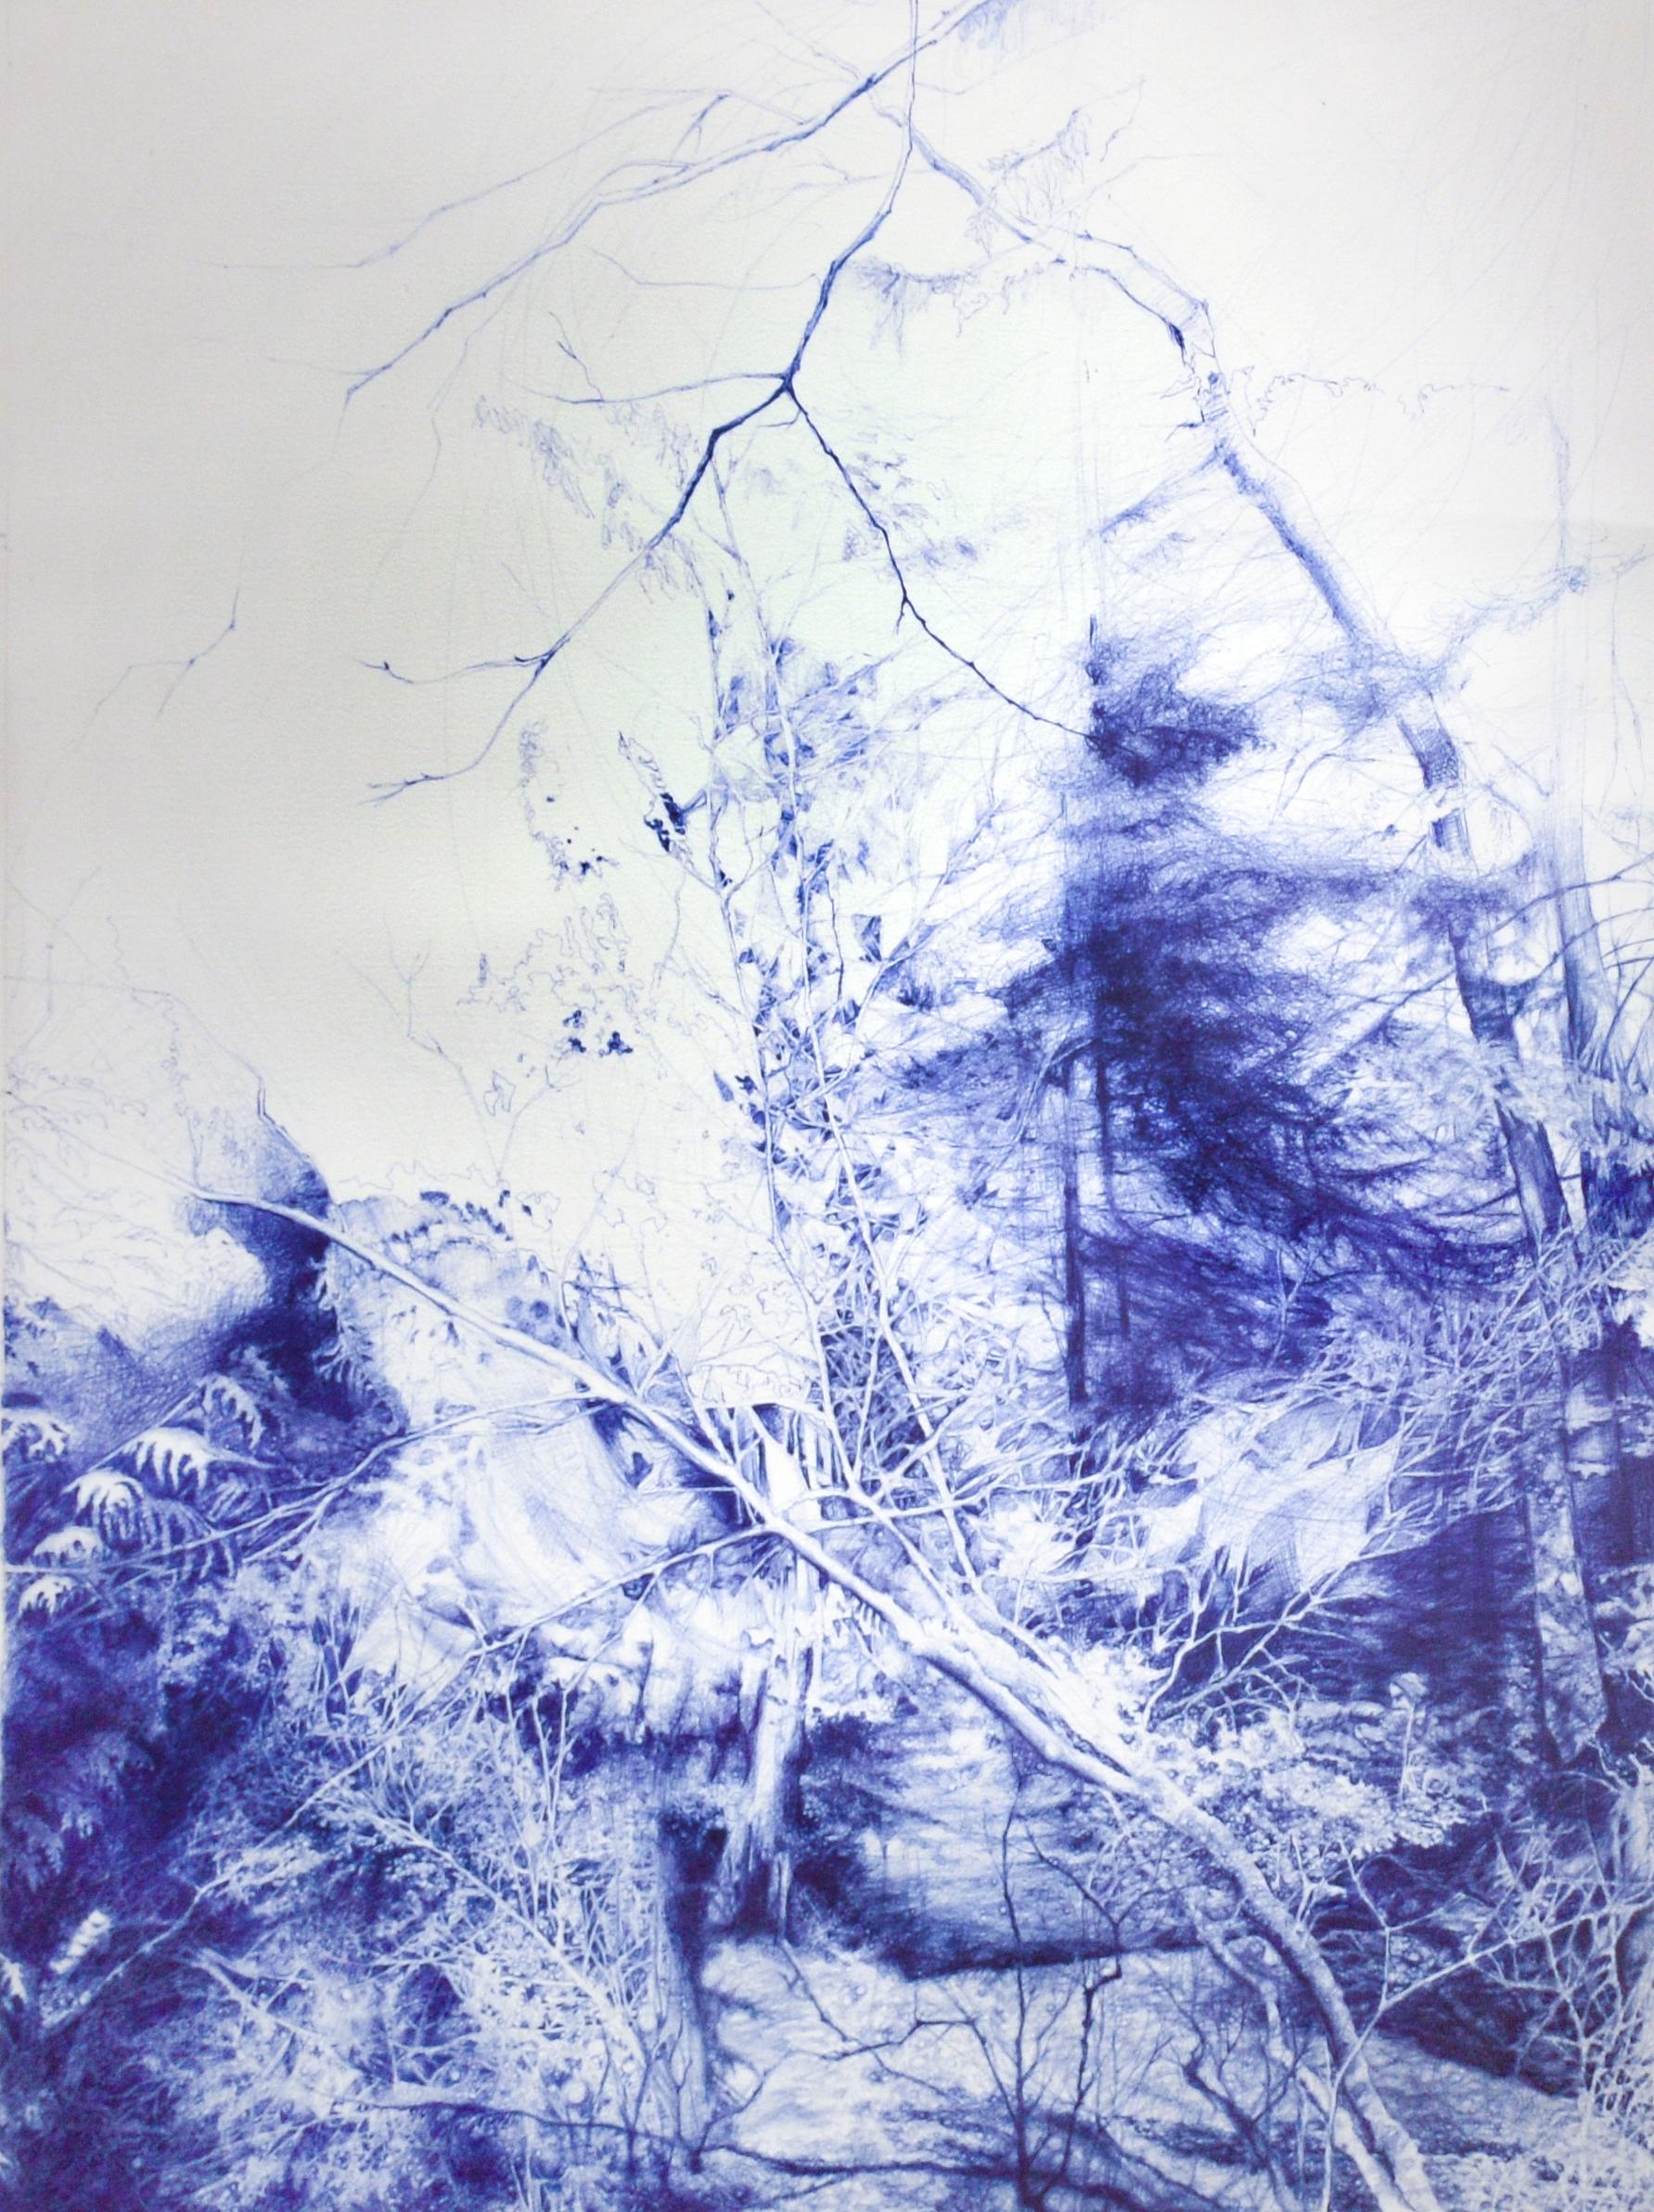 Linda Newman Boughton Figurative Art - The Unseen (Ballpoint pen landscape drawing on paper in Blue ink)